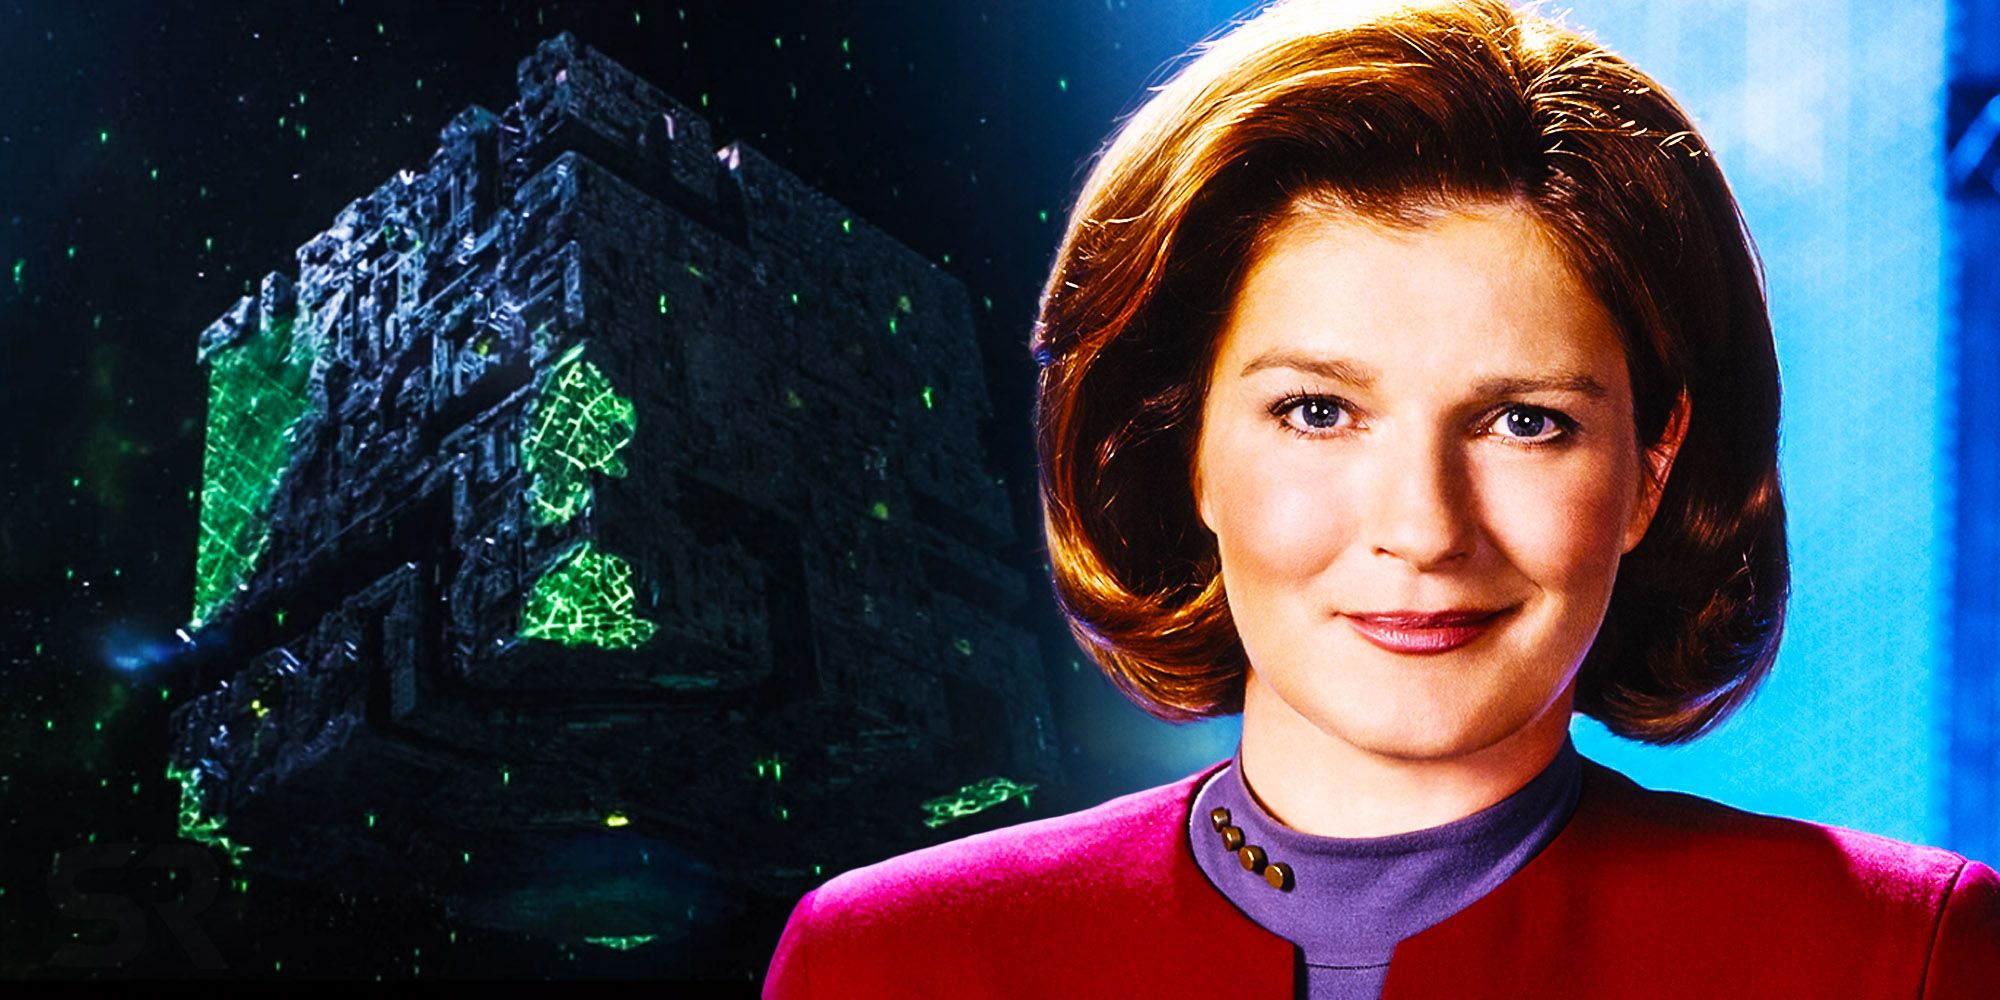 Captain Janeway and a Borg Cube from Star Trek.